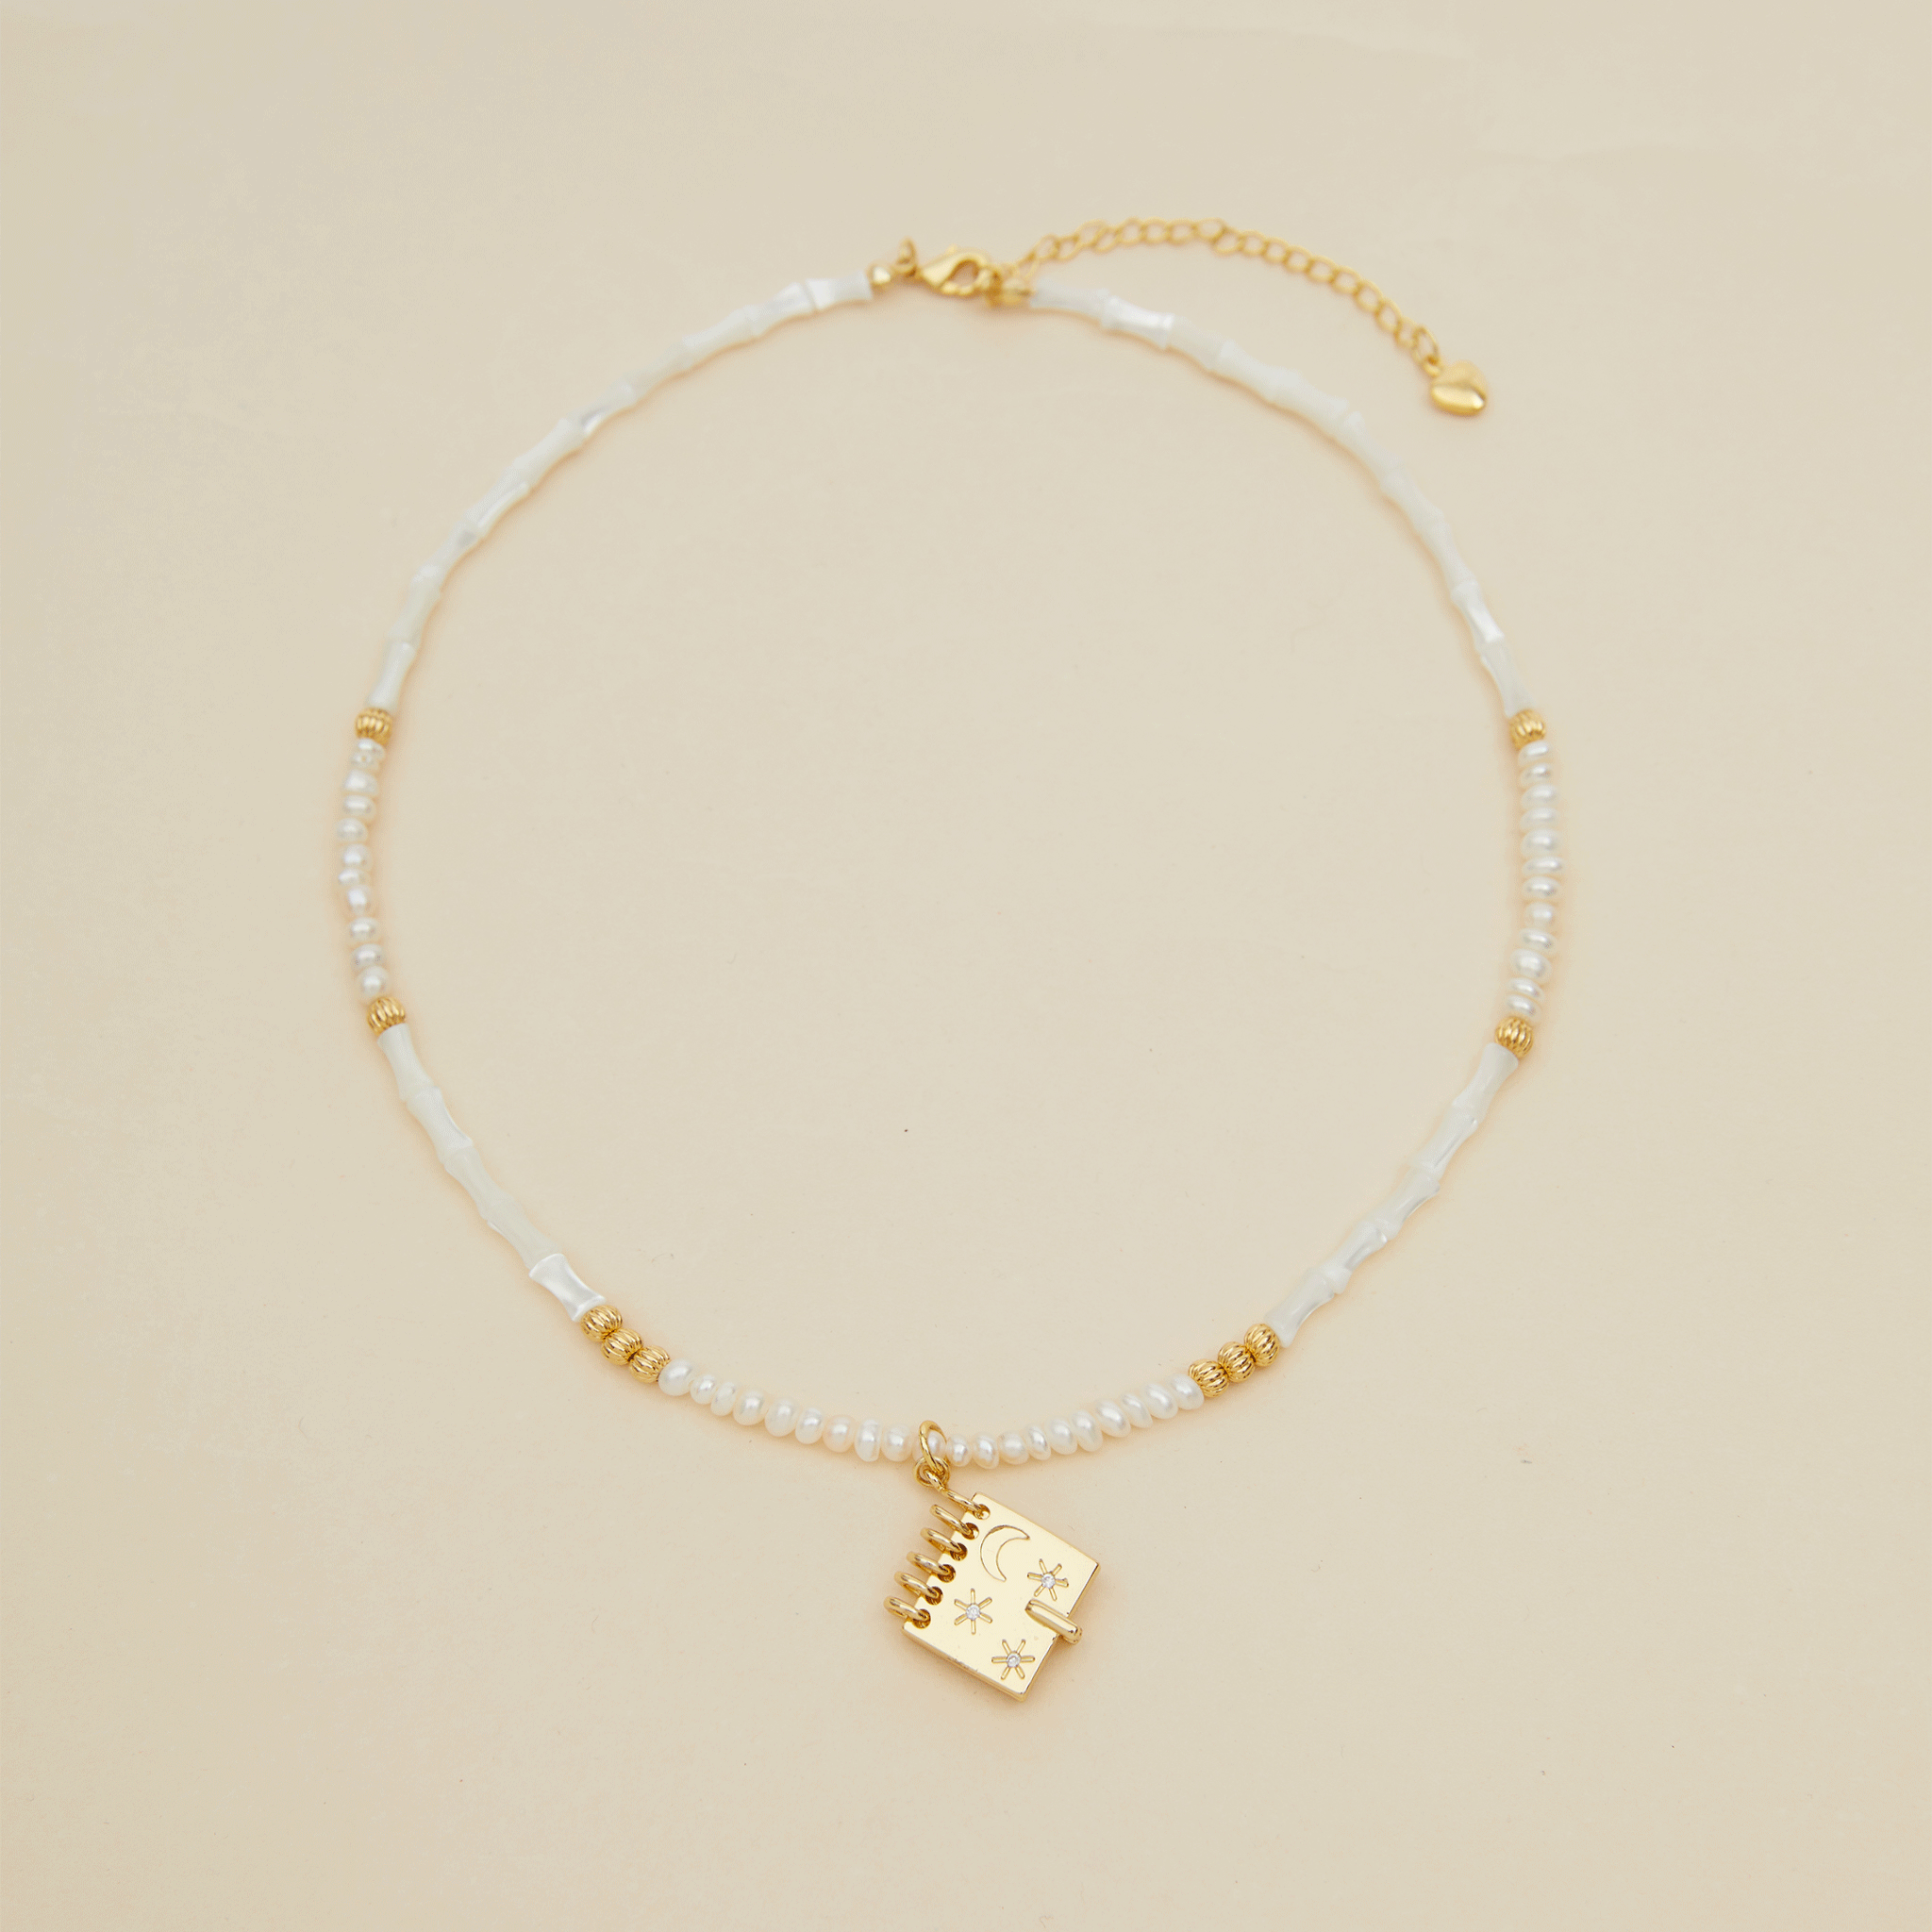 The Book of Luck Necklace